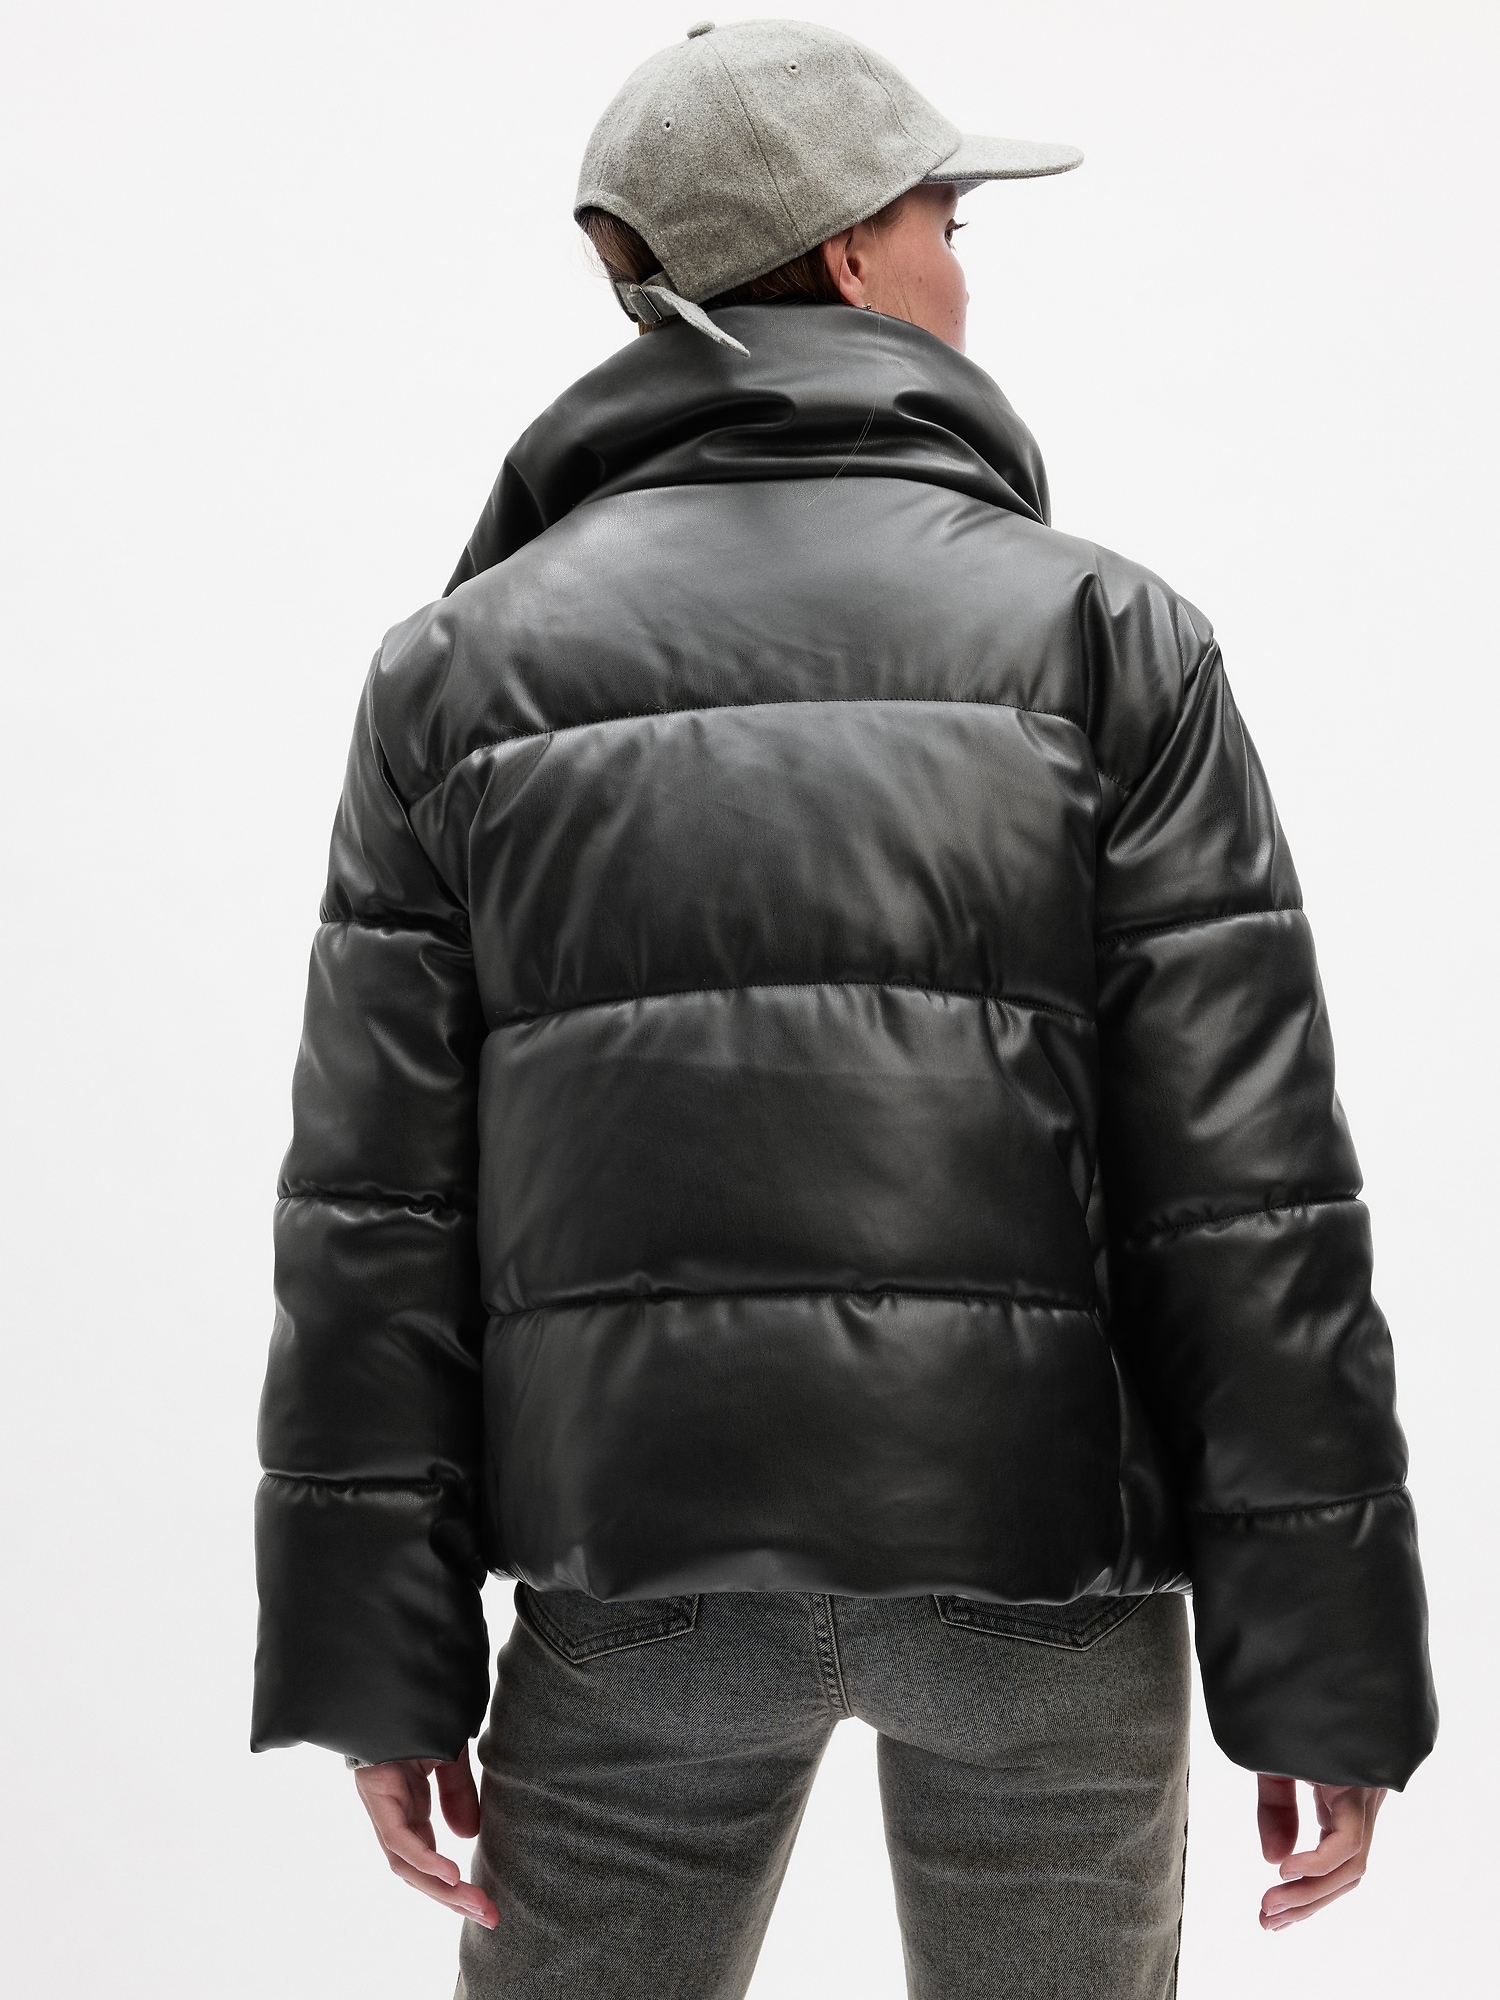 Relaxed Vegan-Leather Puffer Jacket | Gap Factory